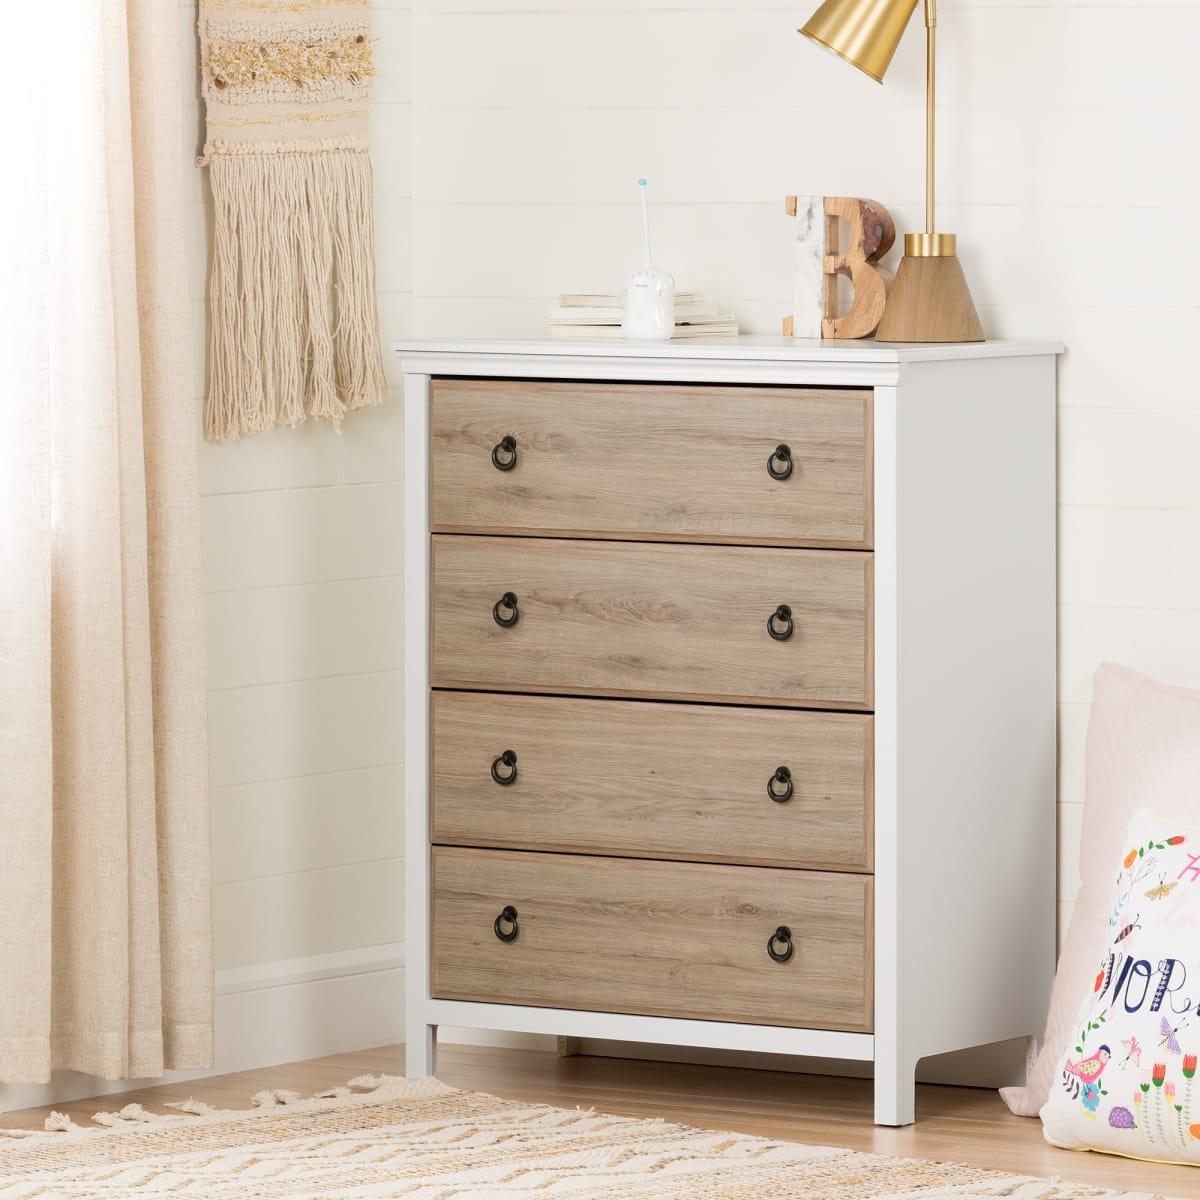 Cotton Candy - 4-Drawer Chest - The Baby's Room